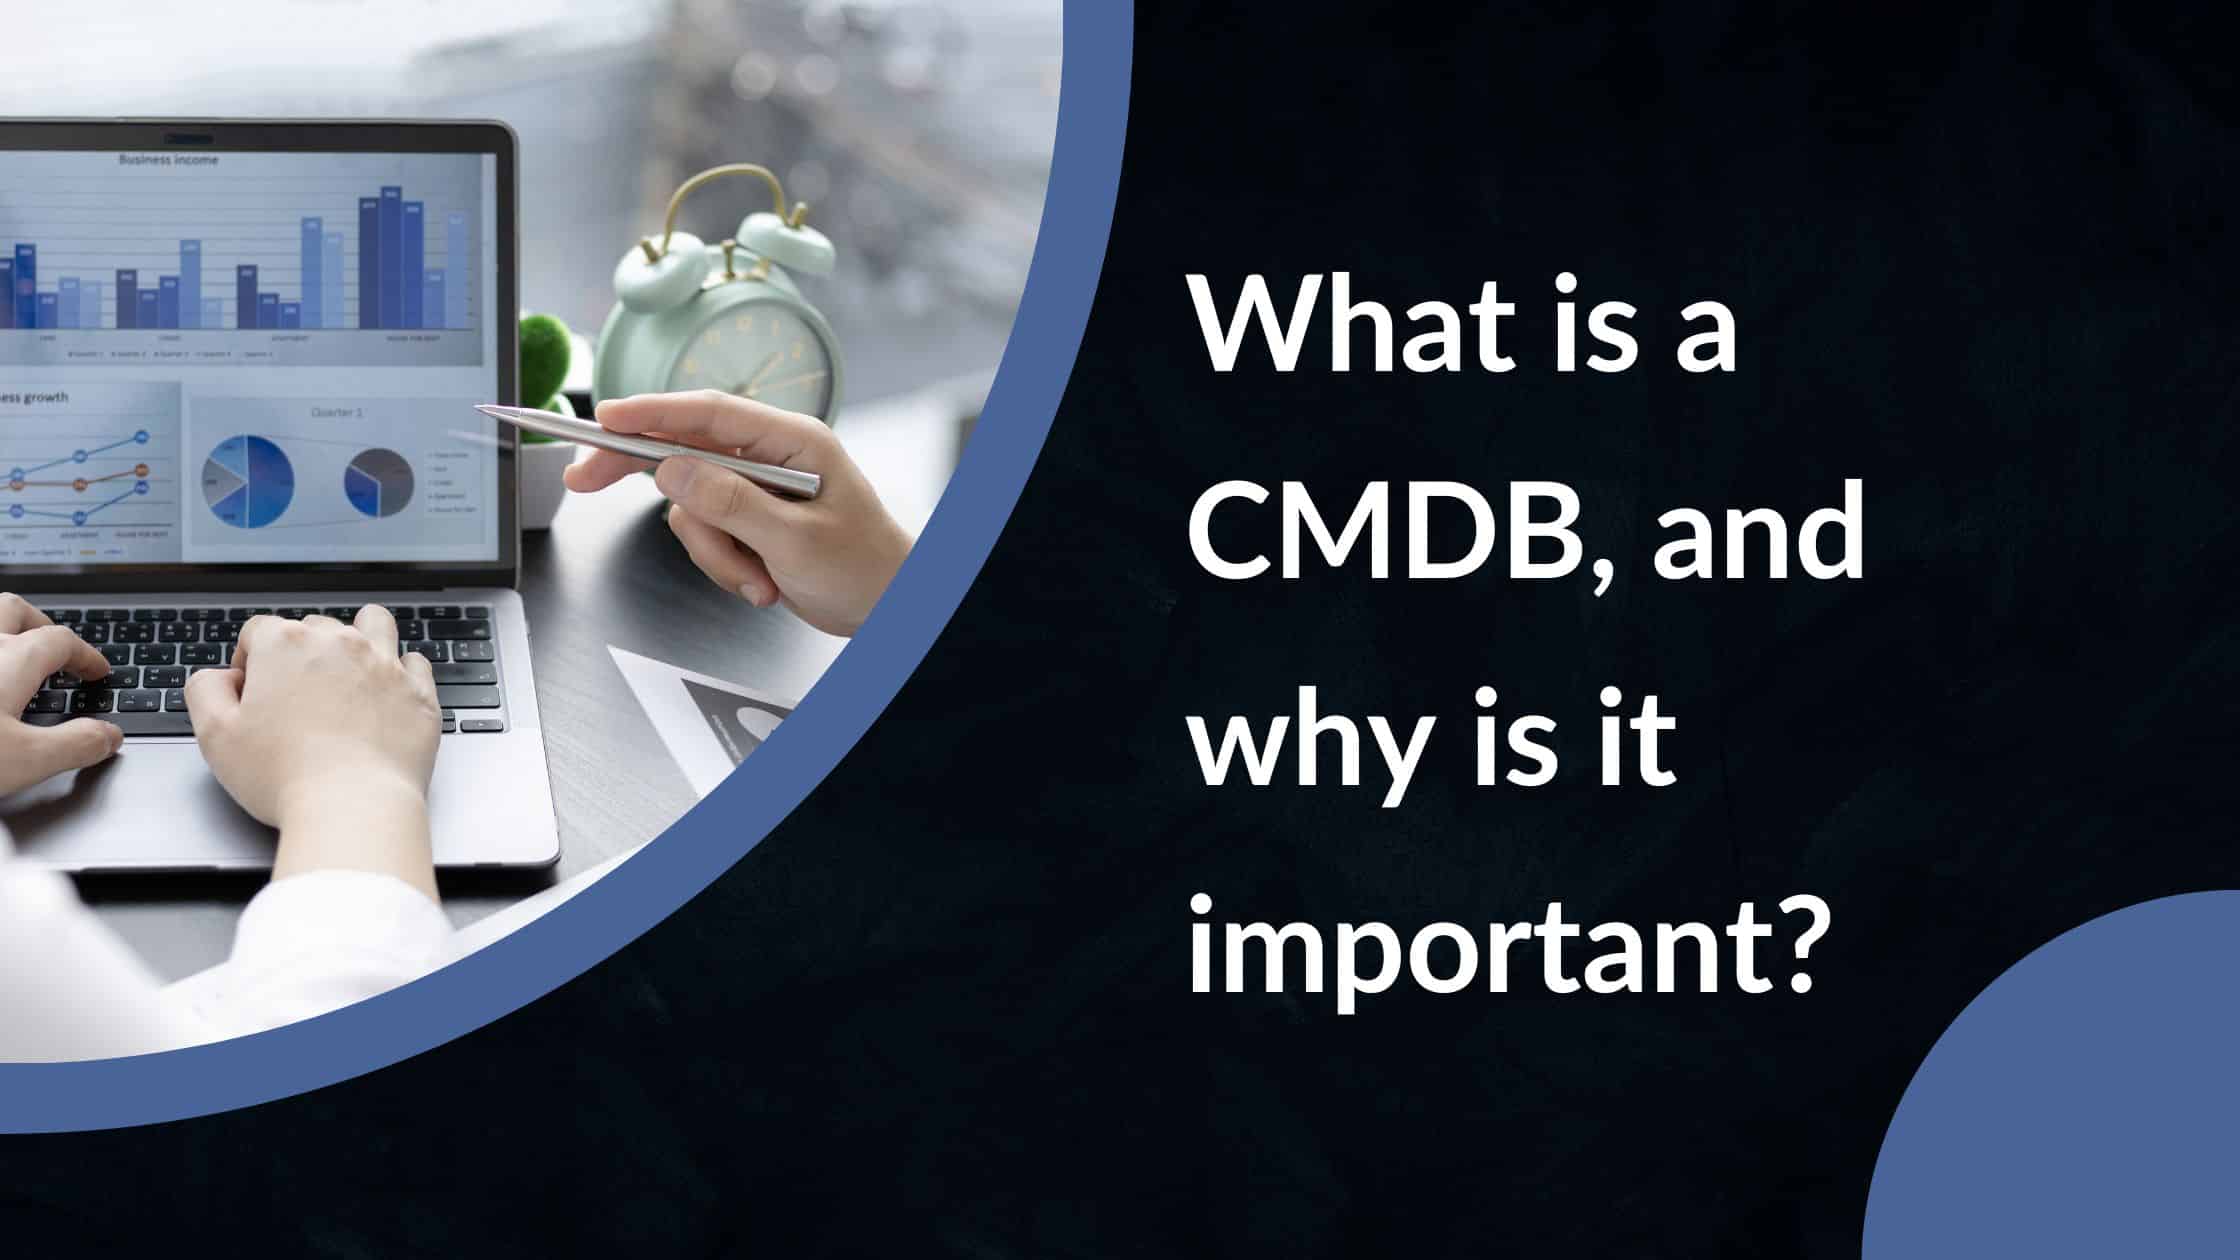 What is a CMDB, and why is it important?